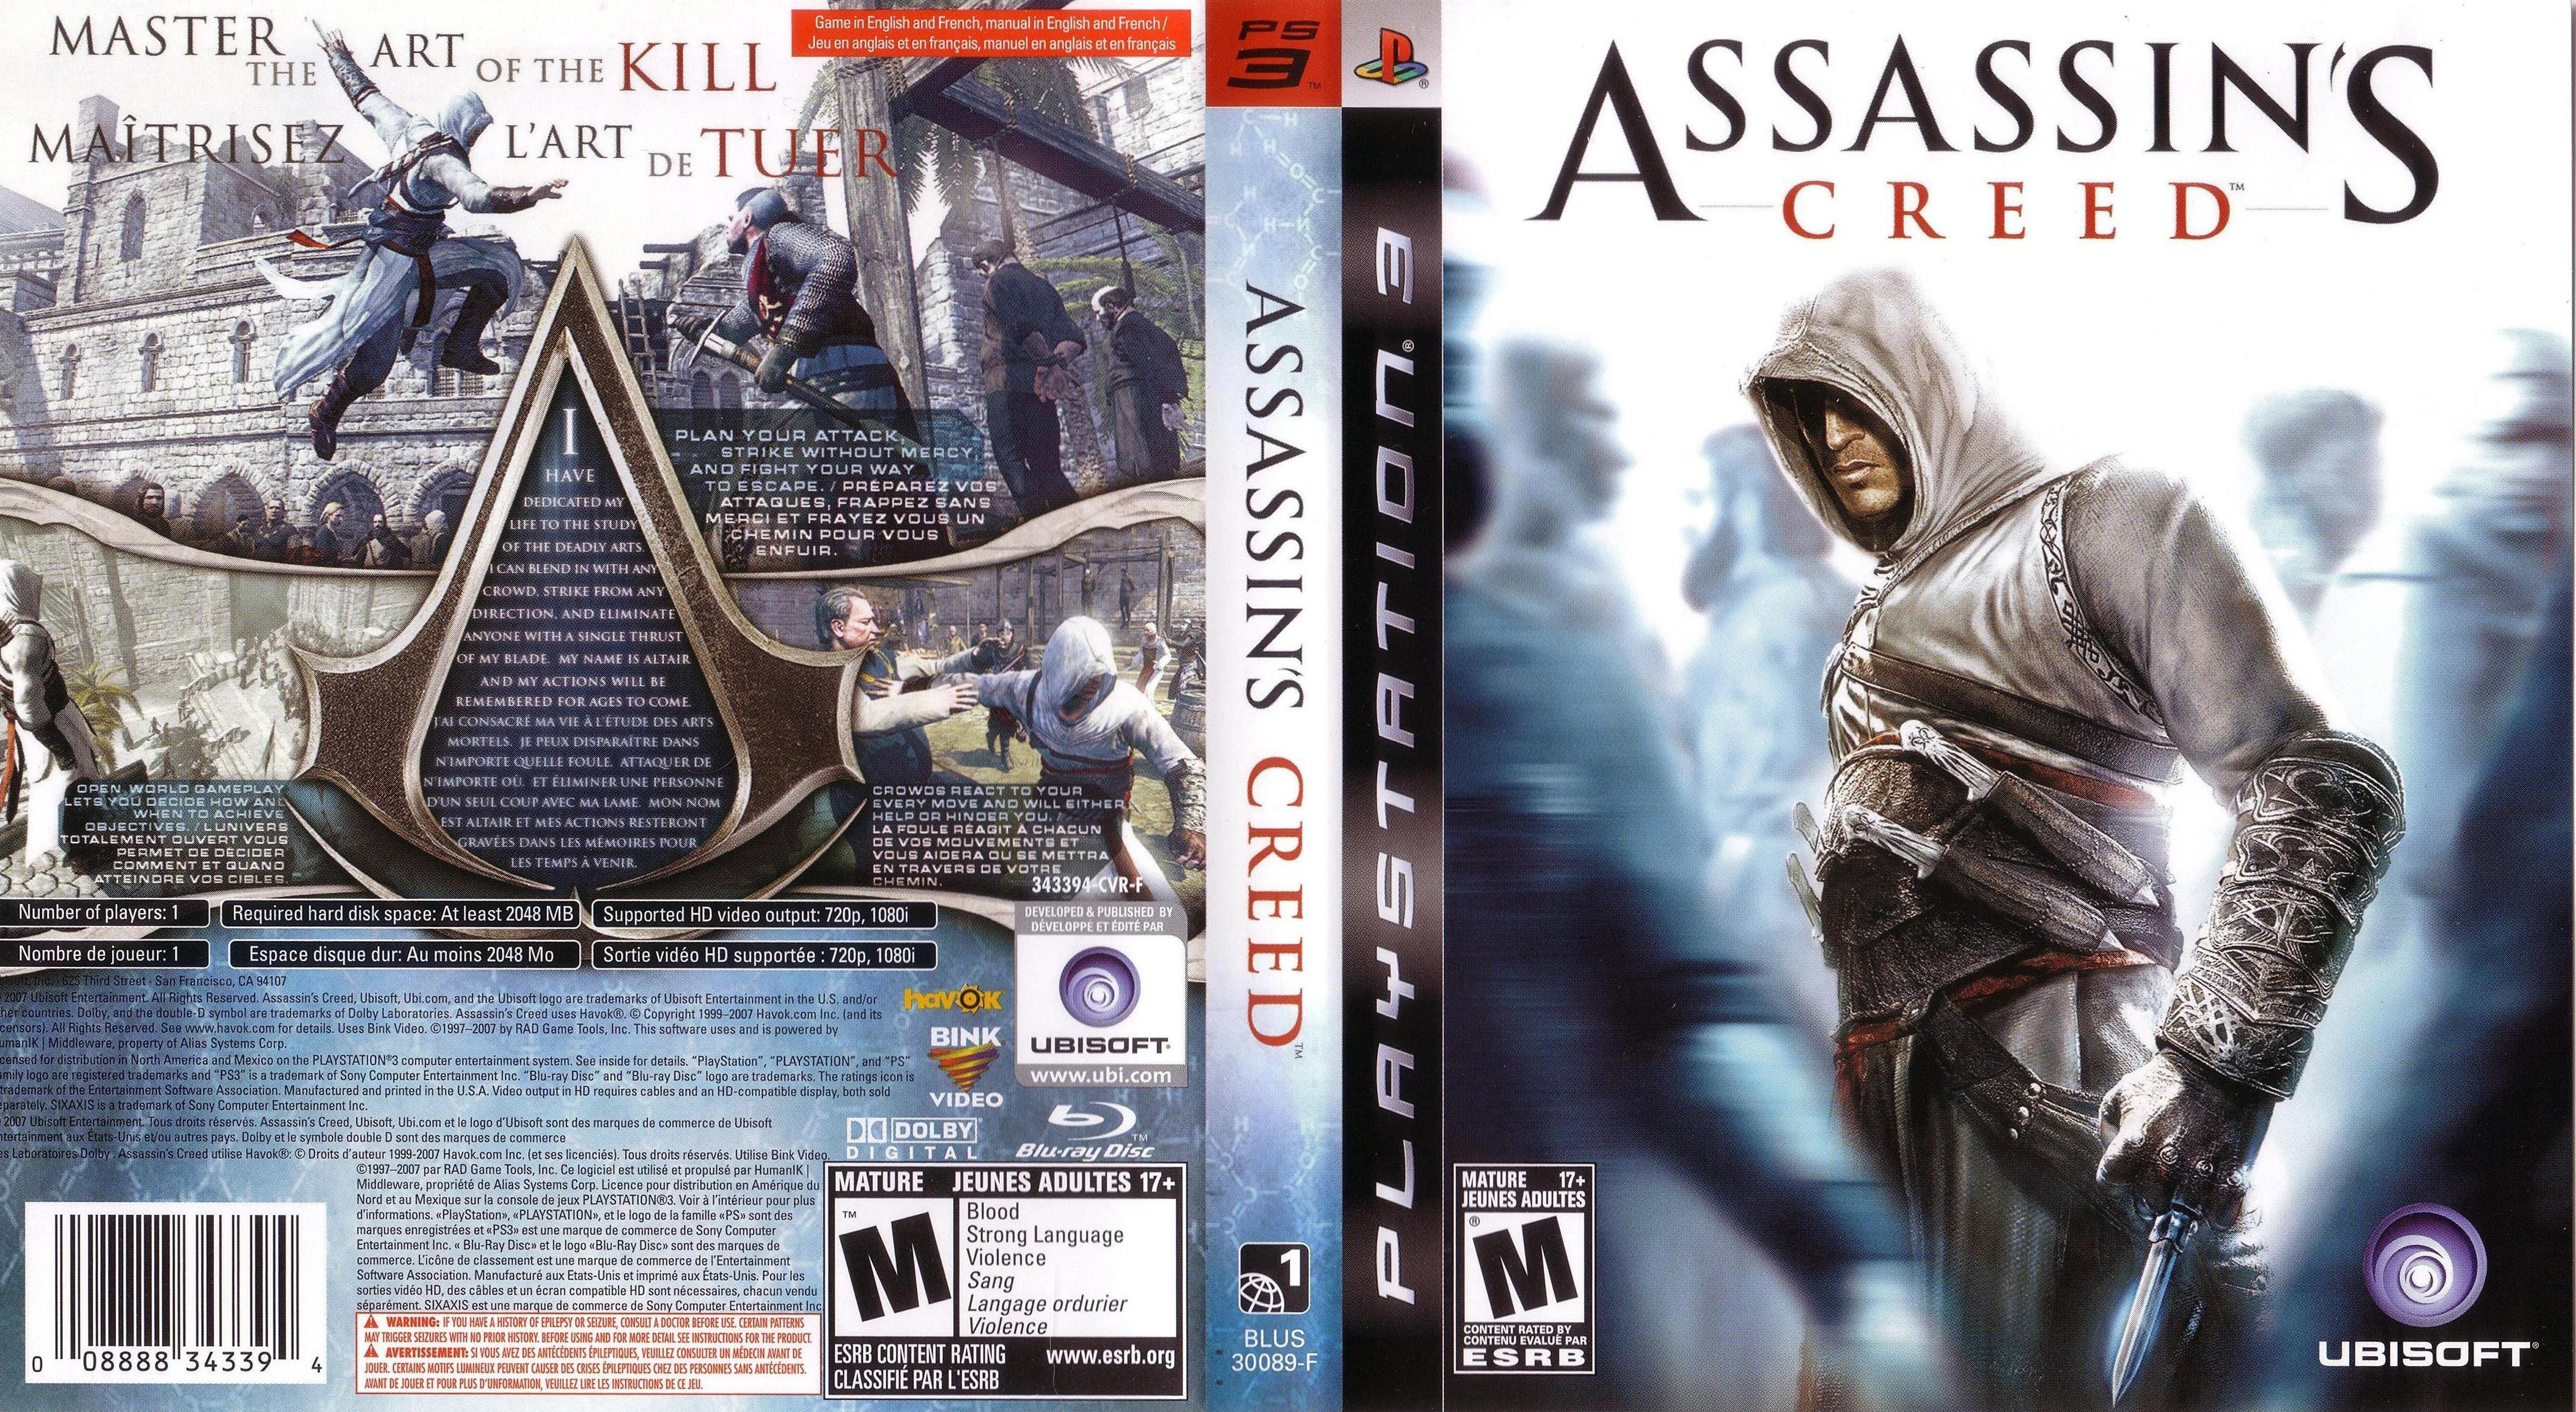 Assassin s 2007. Assassin’s Creed 1 ps3 диск. Assassins Creed 1 ps3. Ассасин Крид 3 на пс3 диск. Assassins Creed 1 ps3 обложка.